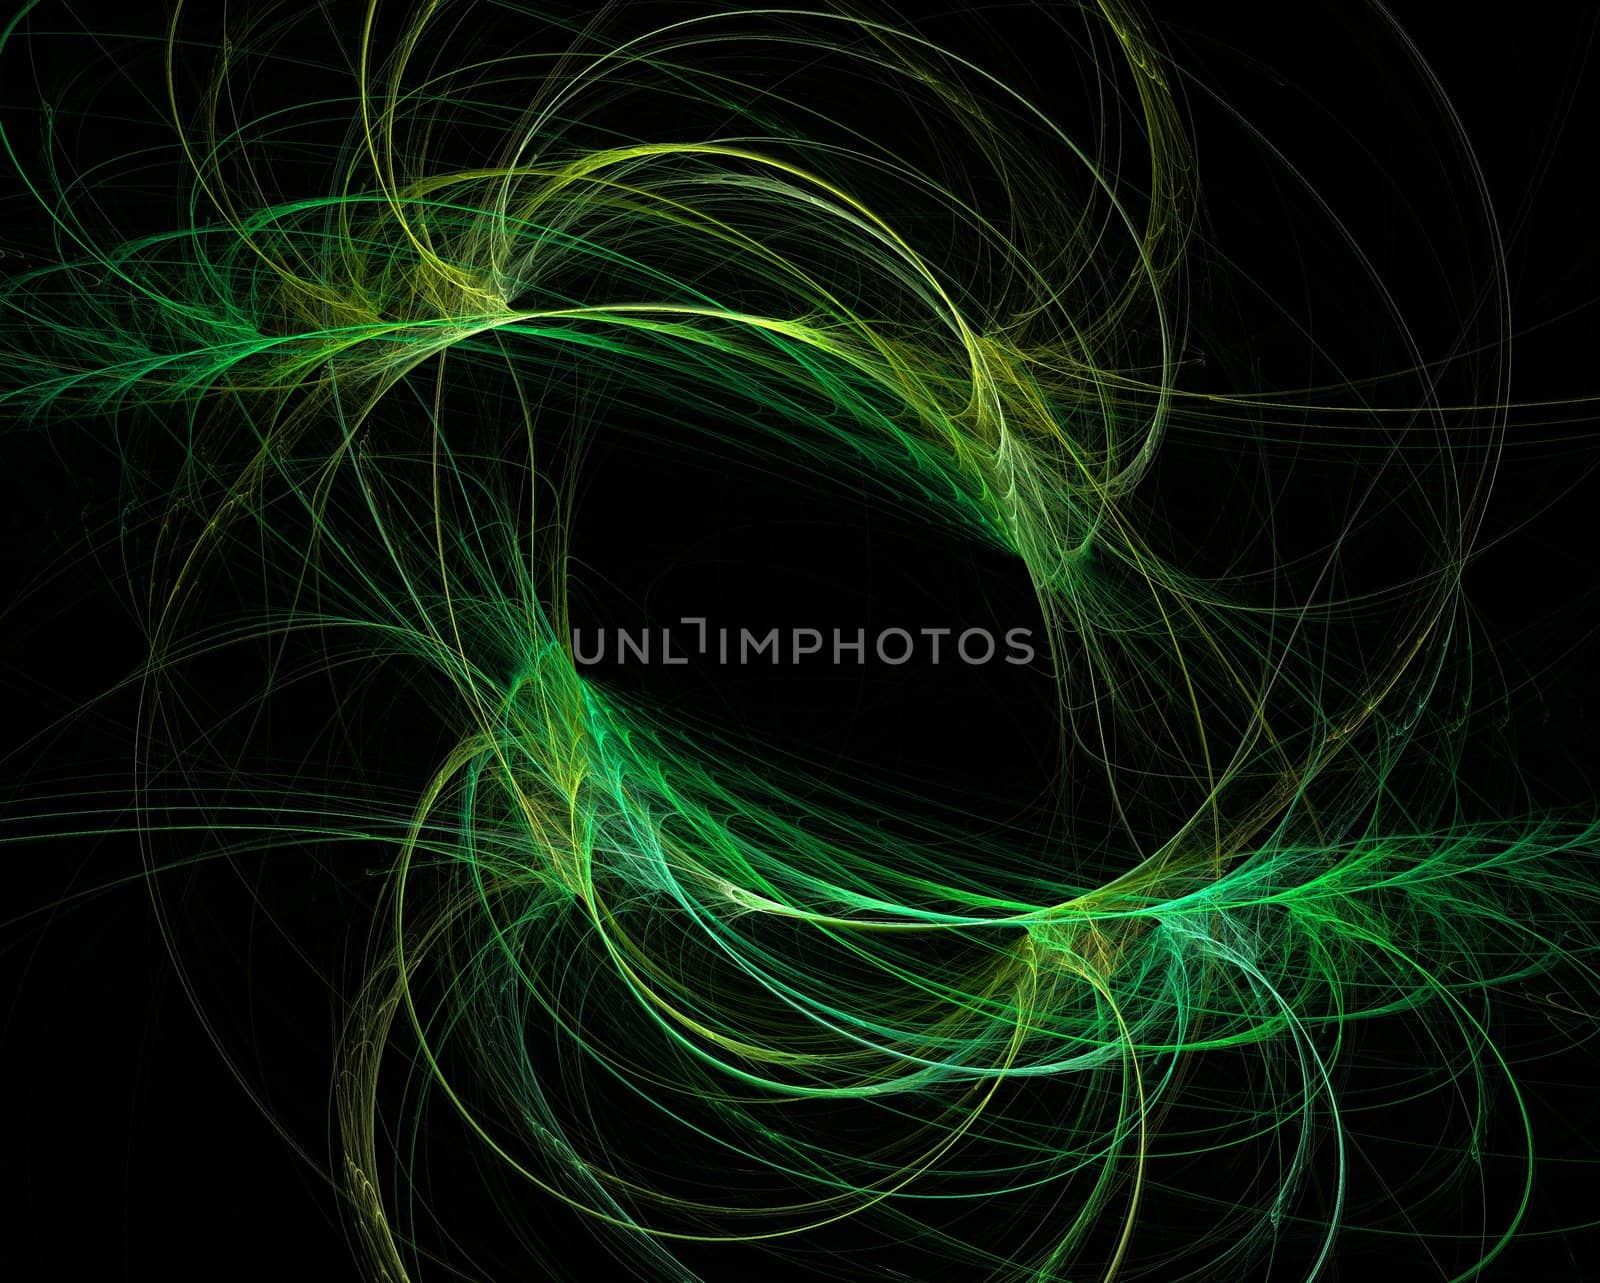 Abstract green curves like feathers on a black background